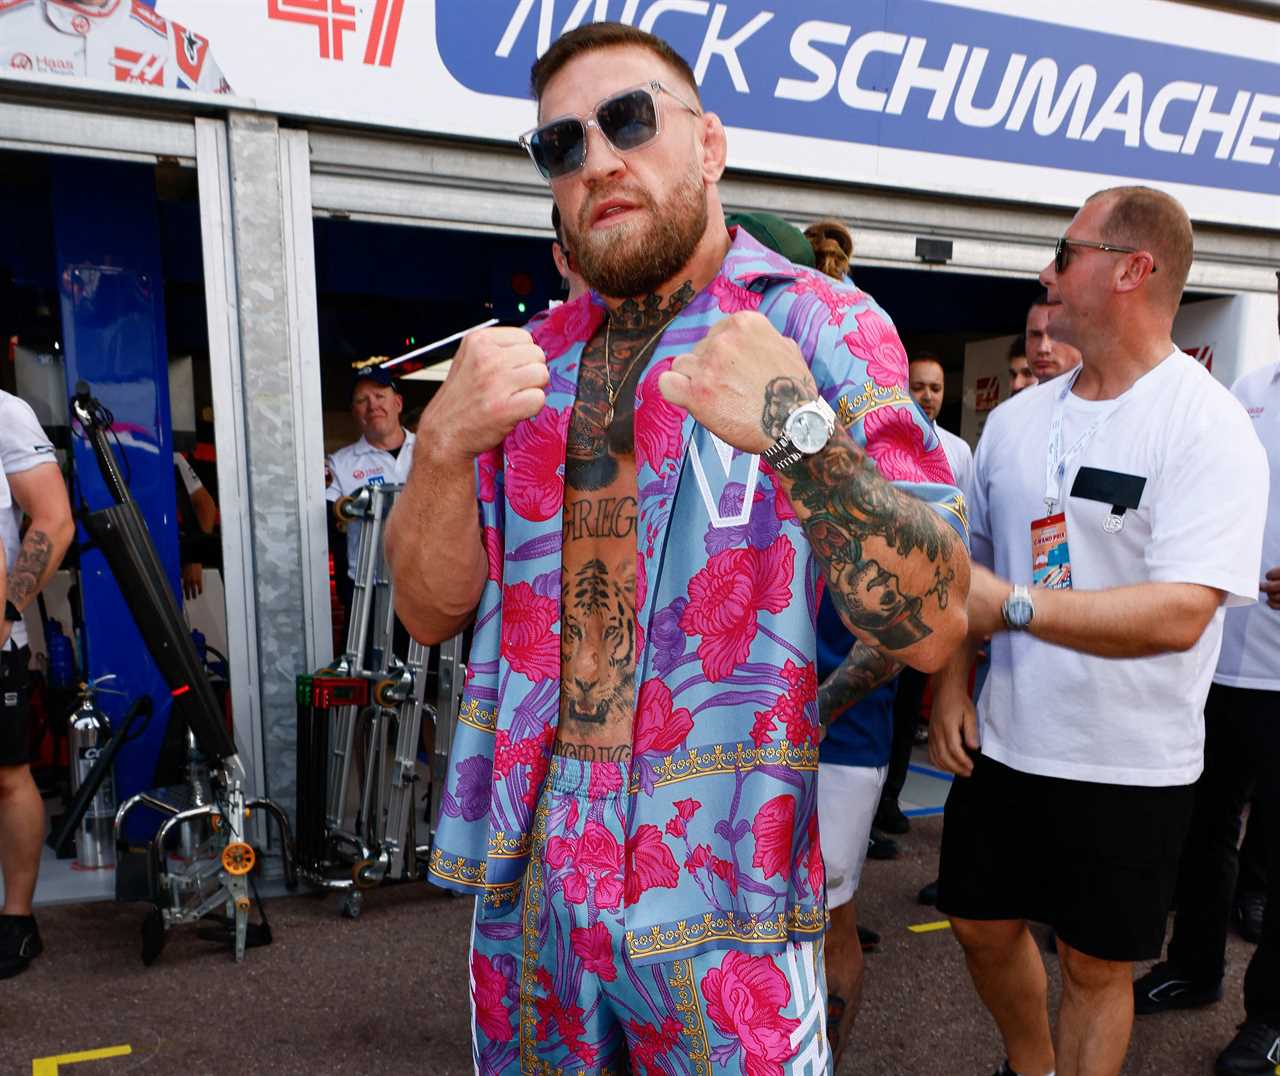 Conor McGregor offered a shot at the UFC title in his first fight since his injury.